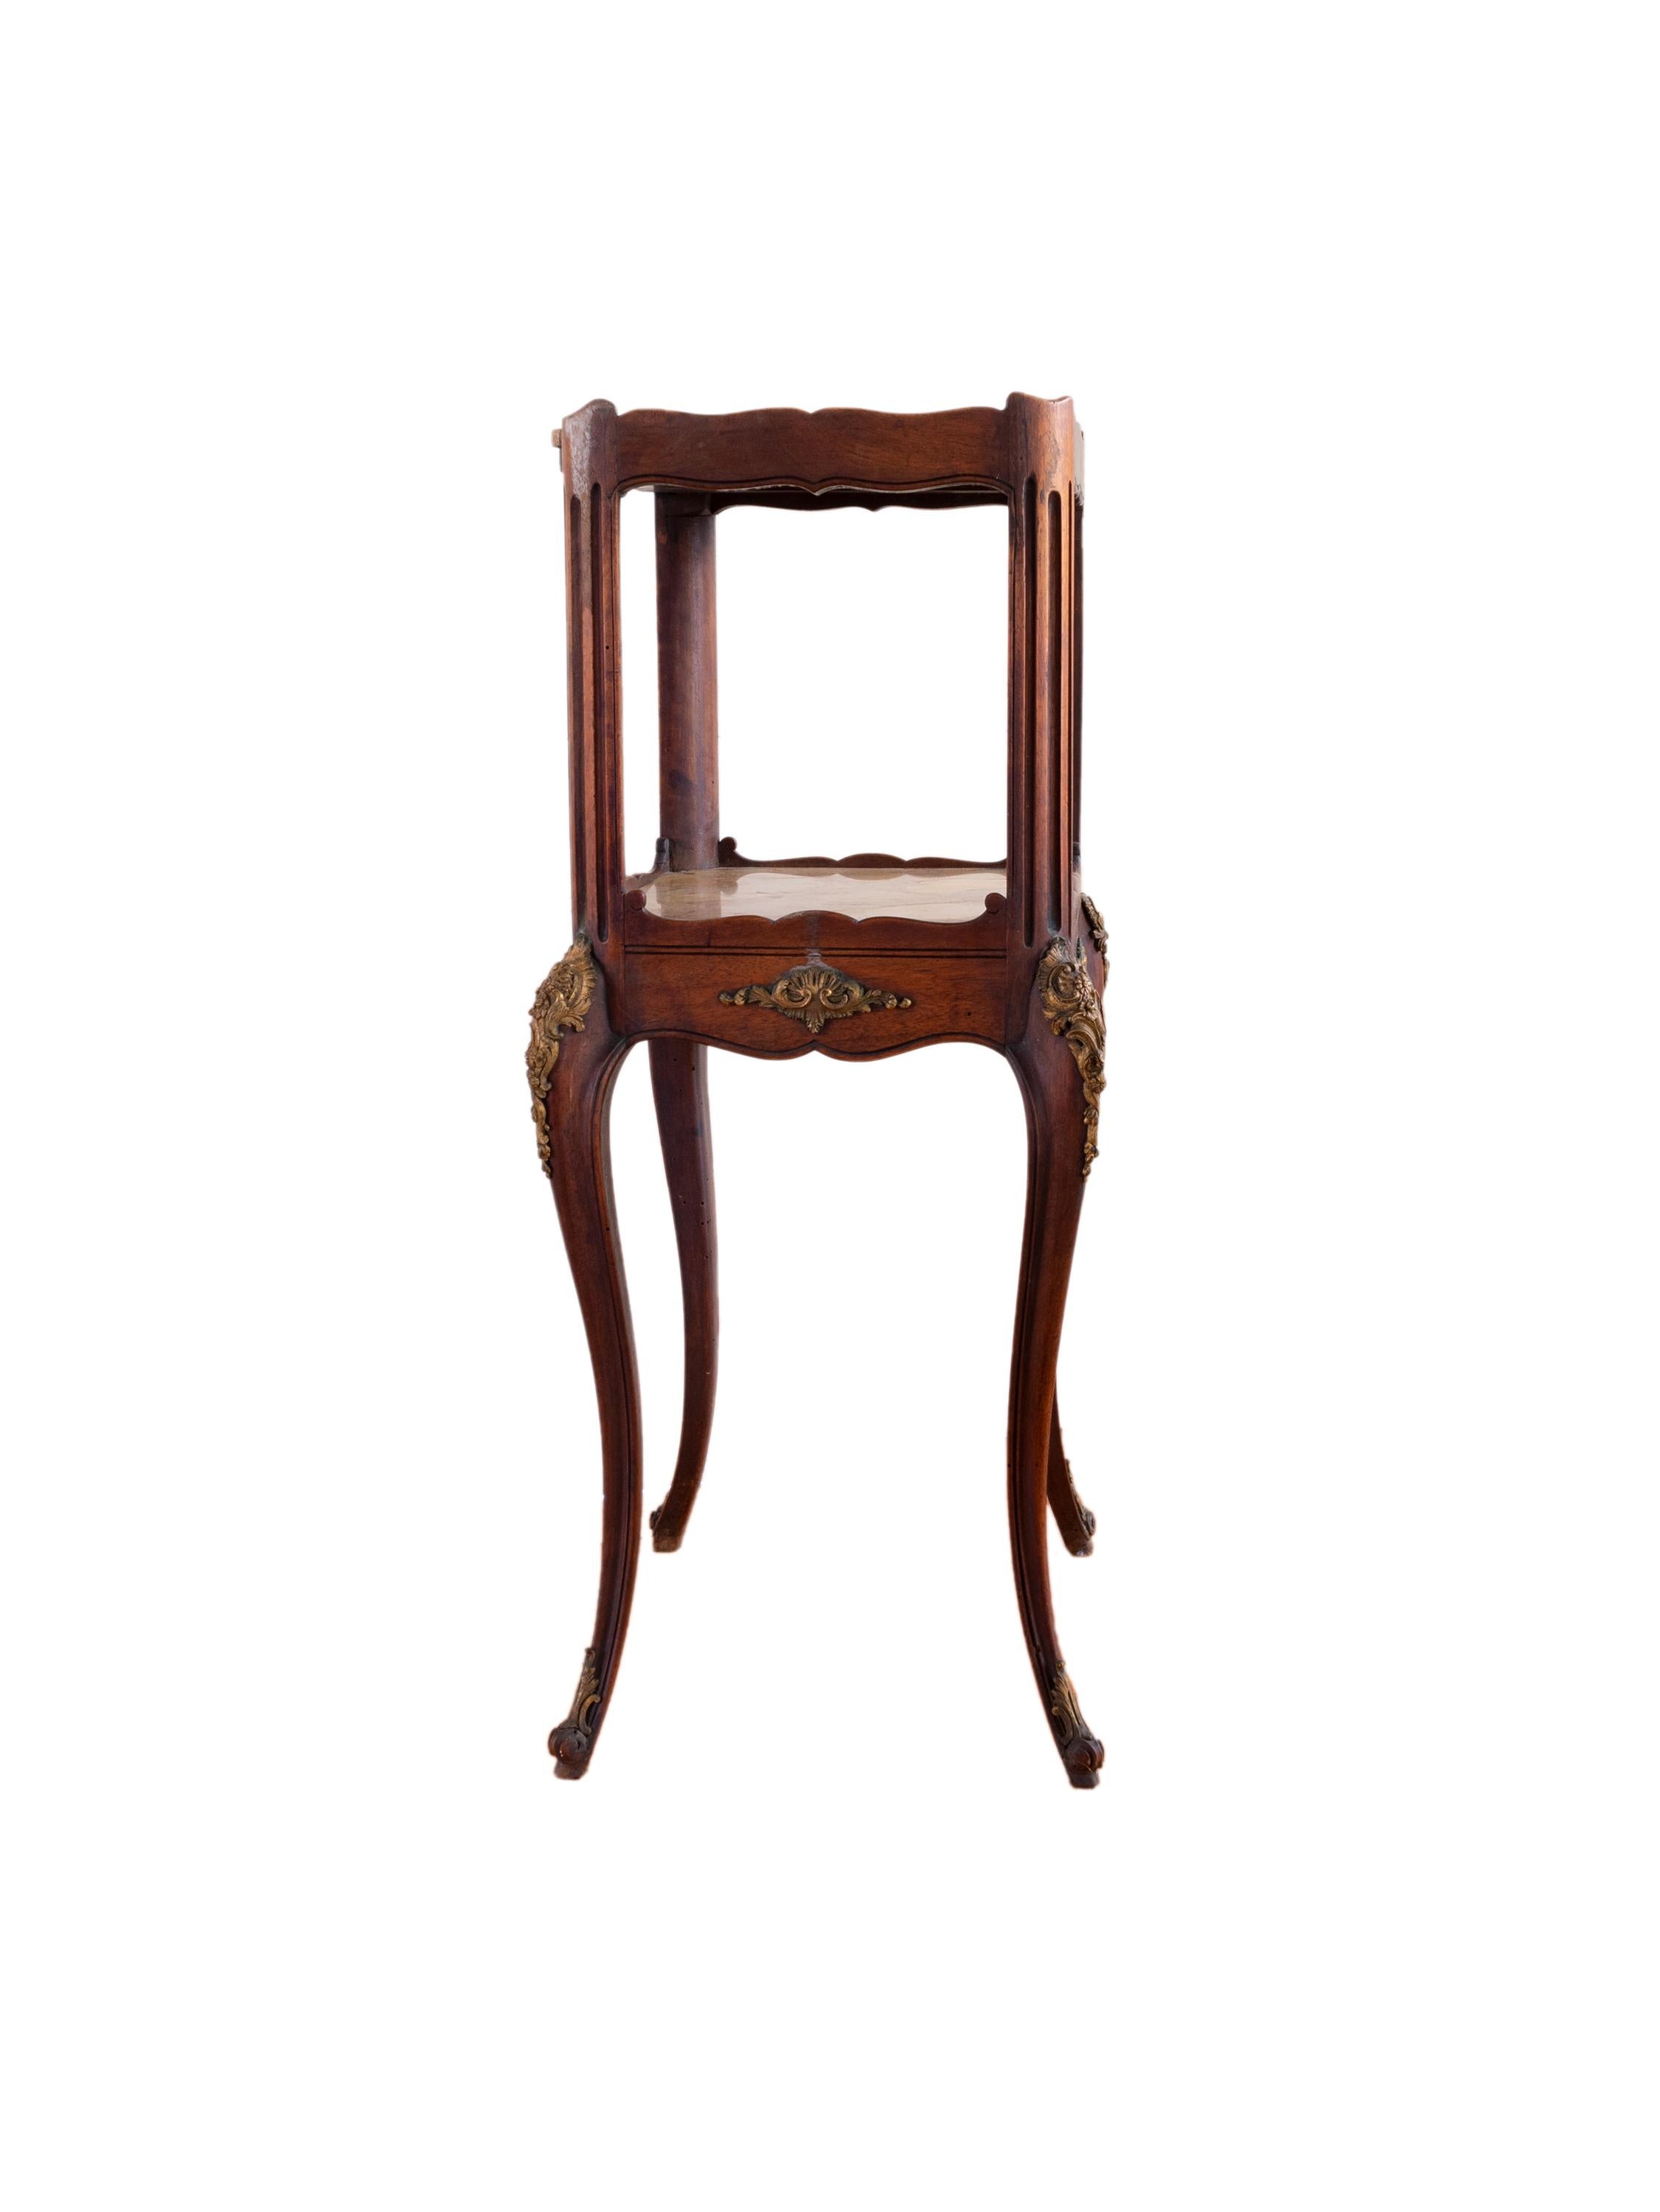 Art Nouveau French Liberty Stand in Walnut, 20th Century For Sale